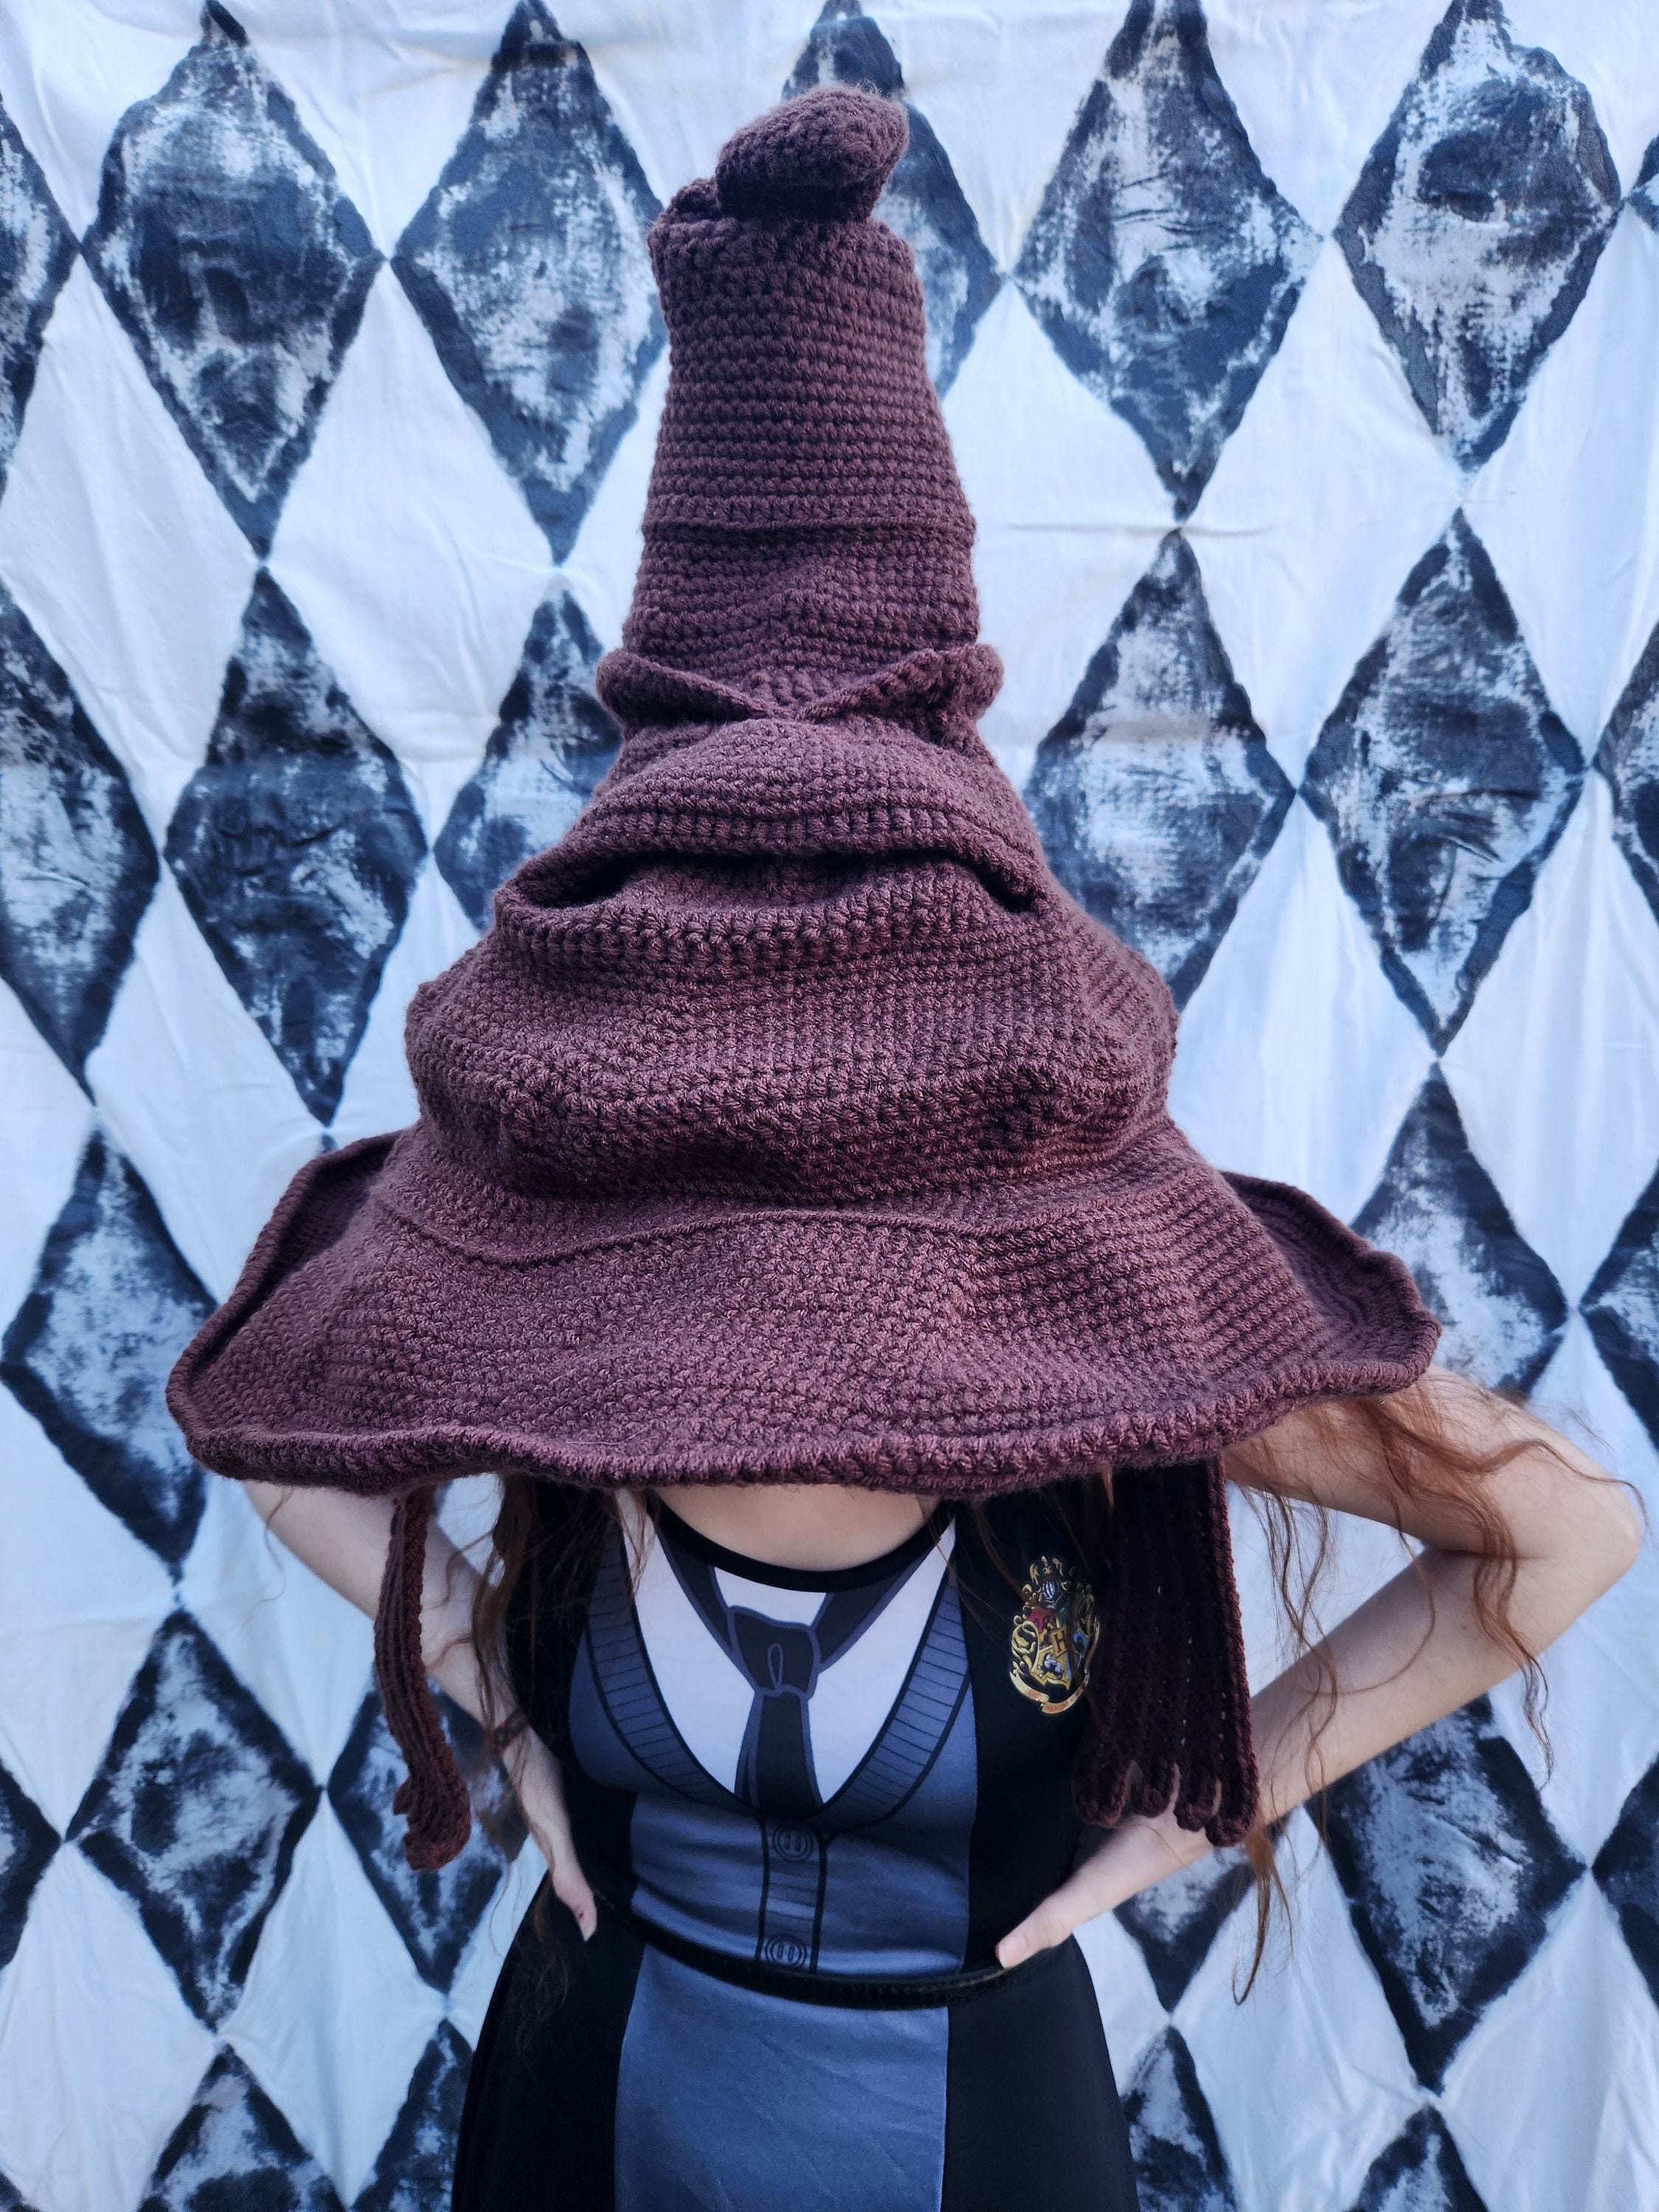 Wizarding World Harry Potter Talking Sorting Hat Costume for Kids Childrens  Size